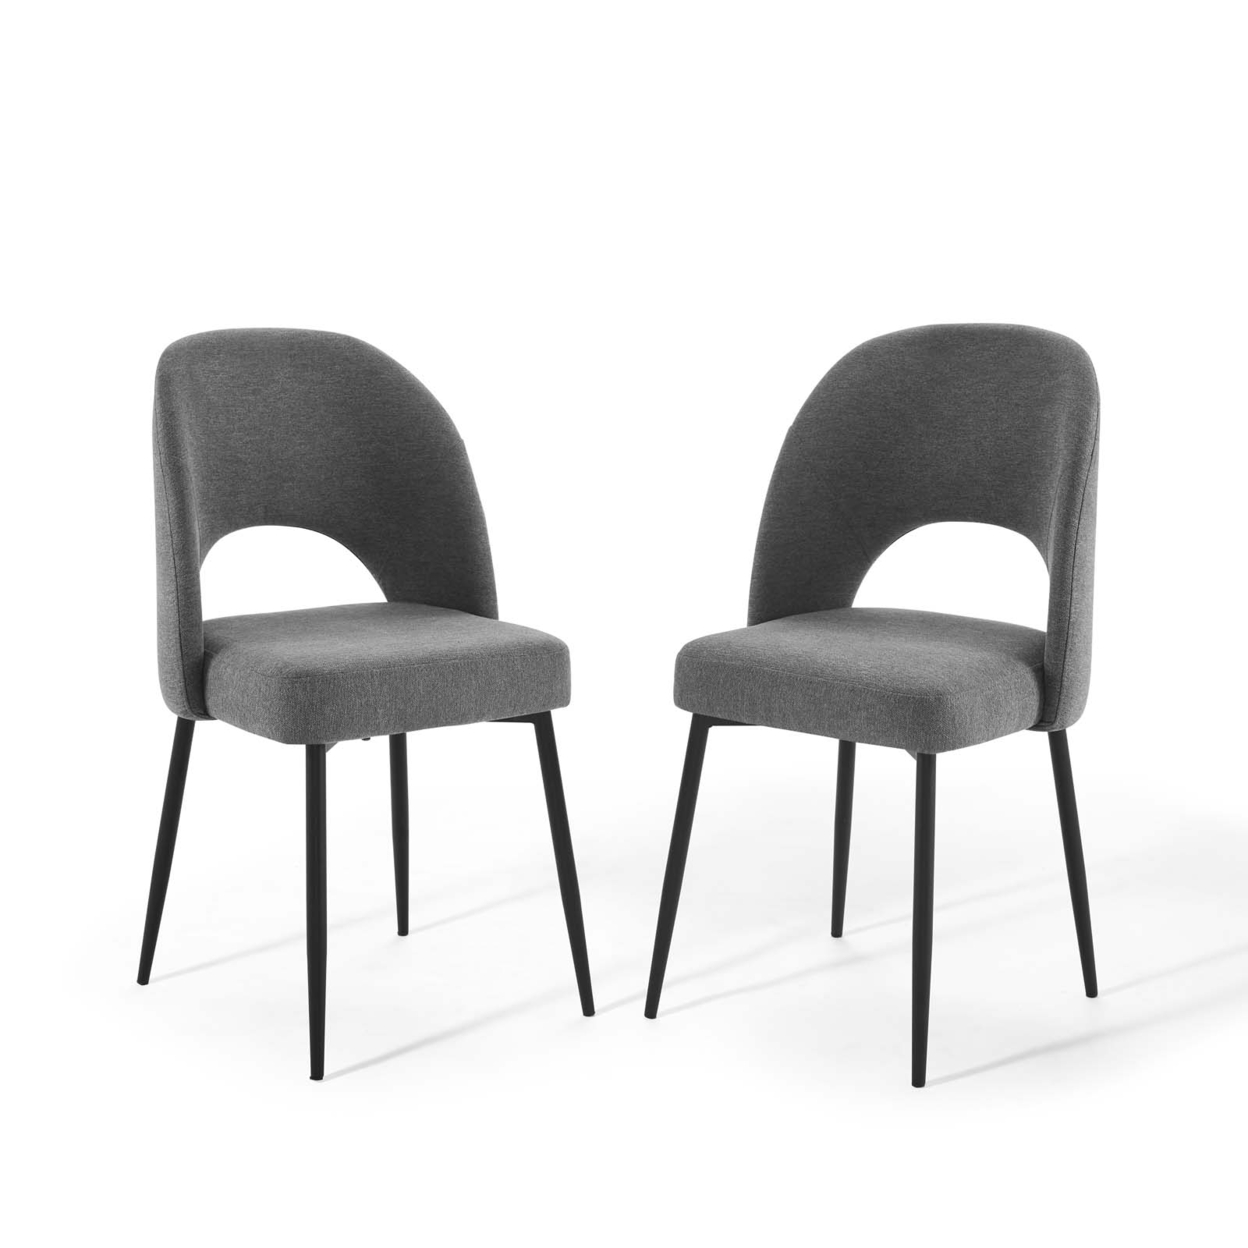 Rouse Dining Side Chair Upholstered Fabric Set Of 2, Black Charcoal